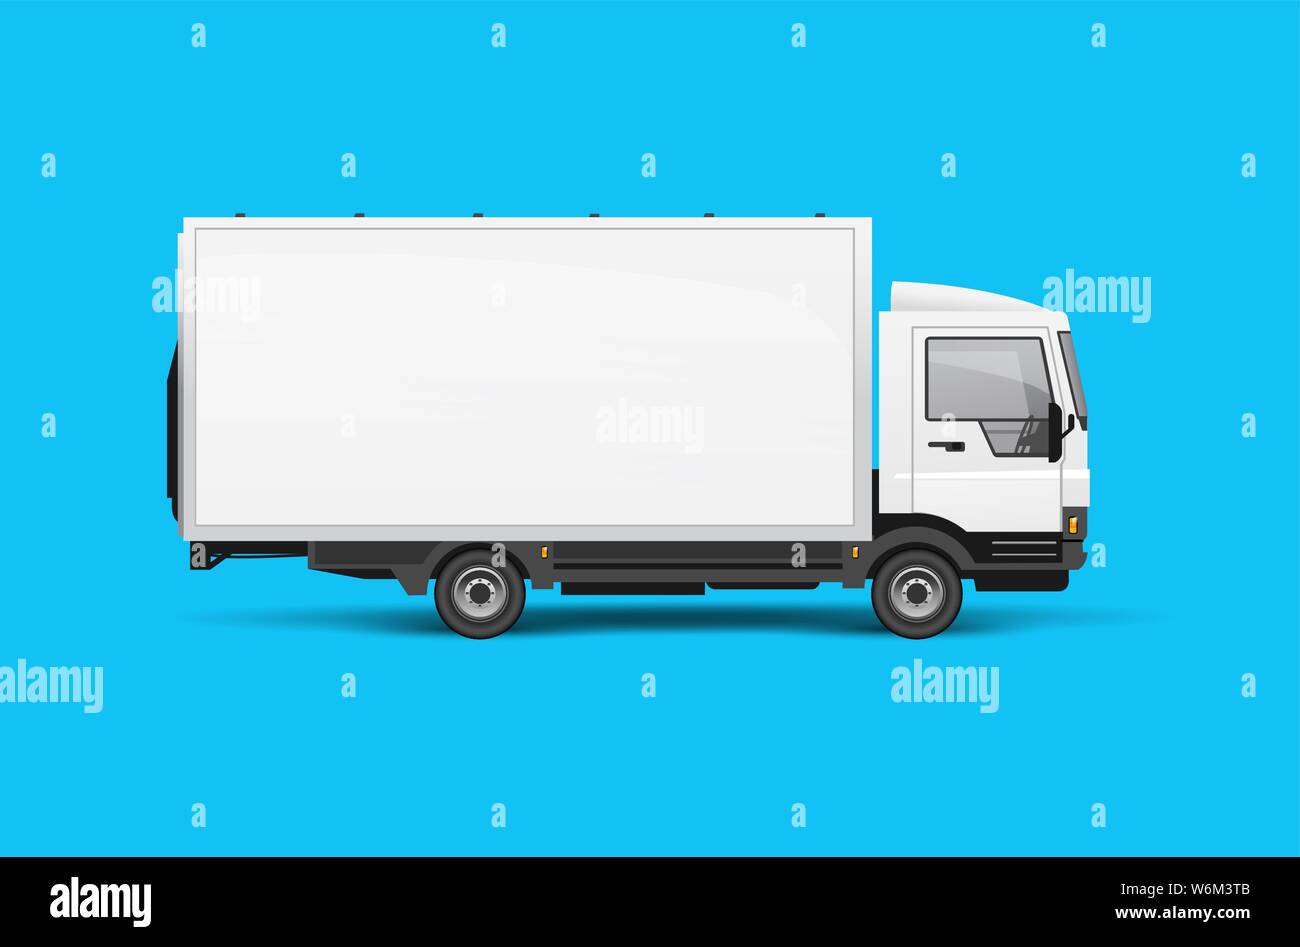 A small logistics lorry truck side view for advertising. Realistic Vector illustration Stock Vector